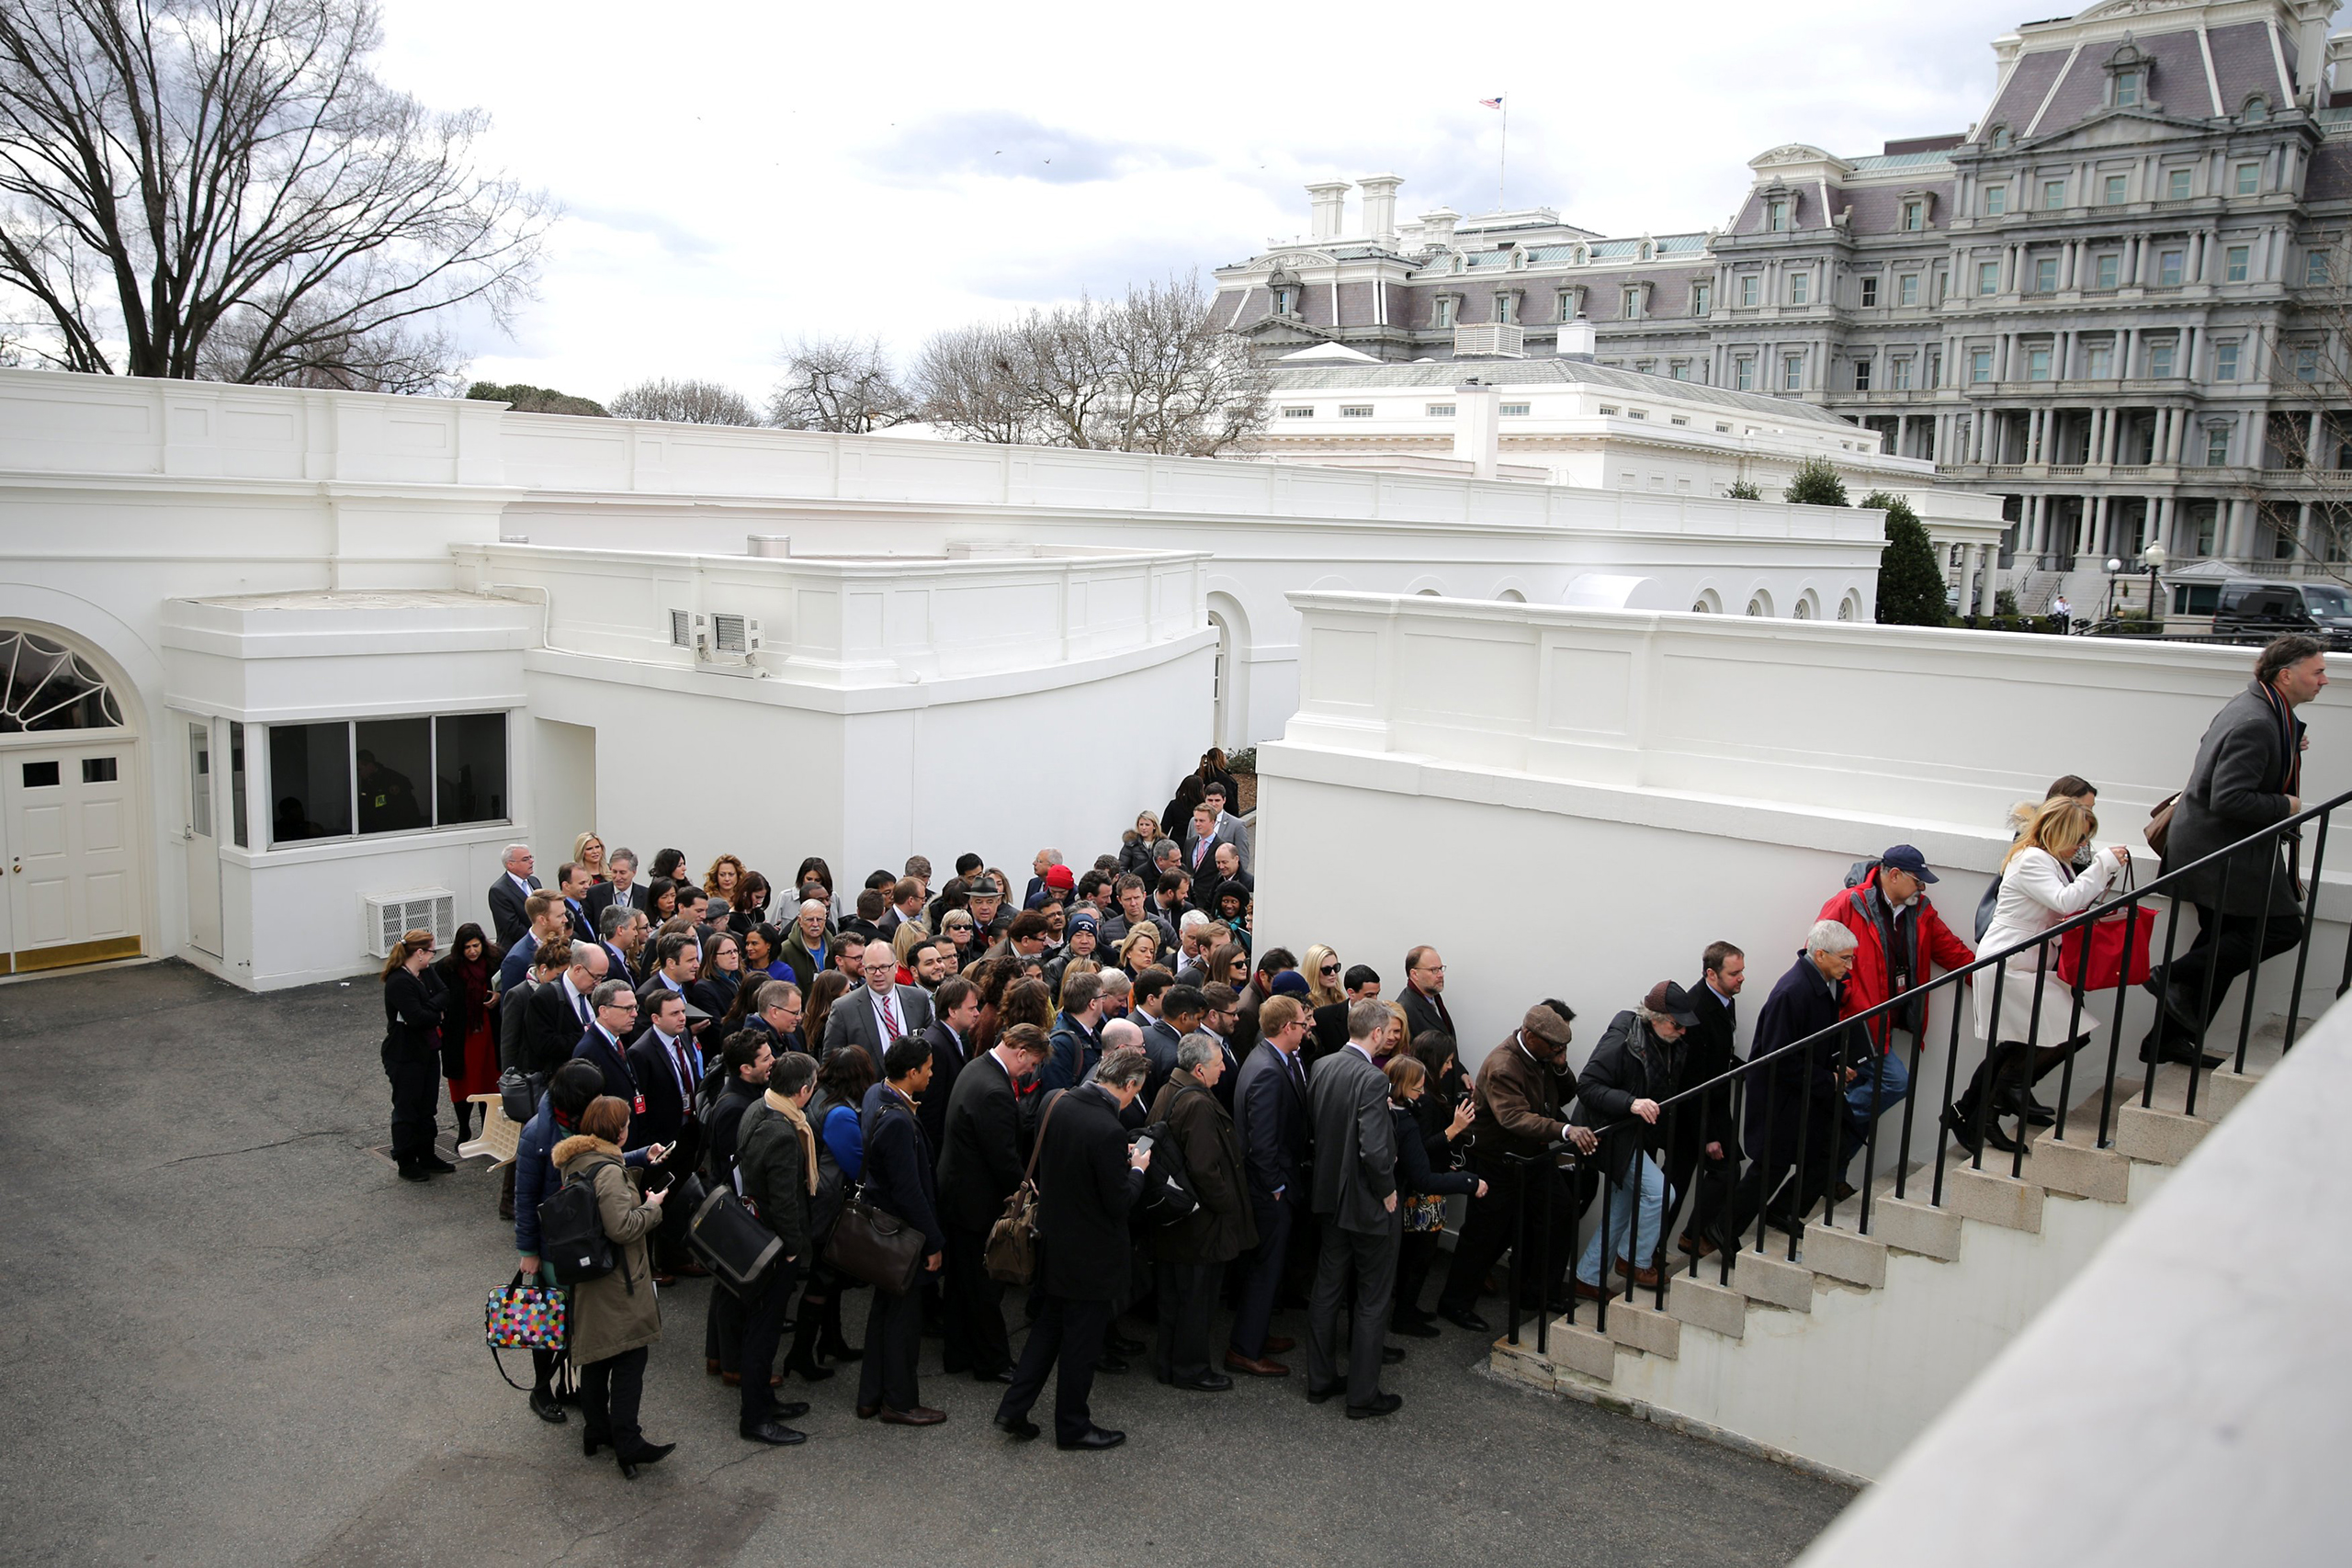 Members of the media line up to attend a news conference between British Prime Minister Theresa May and President Donald Trump at the White House in Washington, on Jan. 27, 2017.